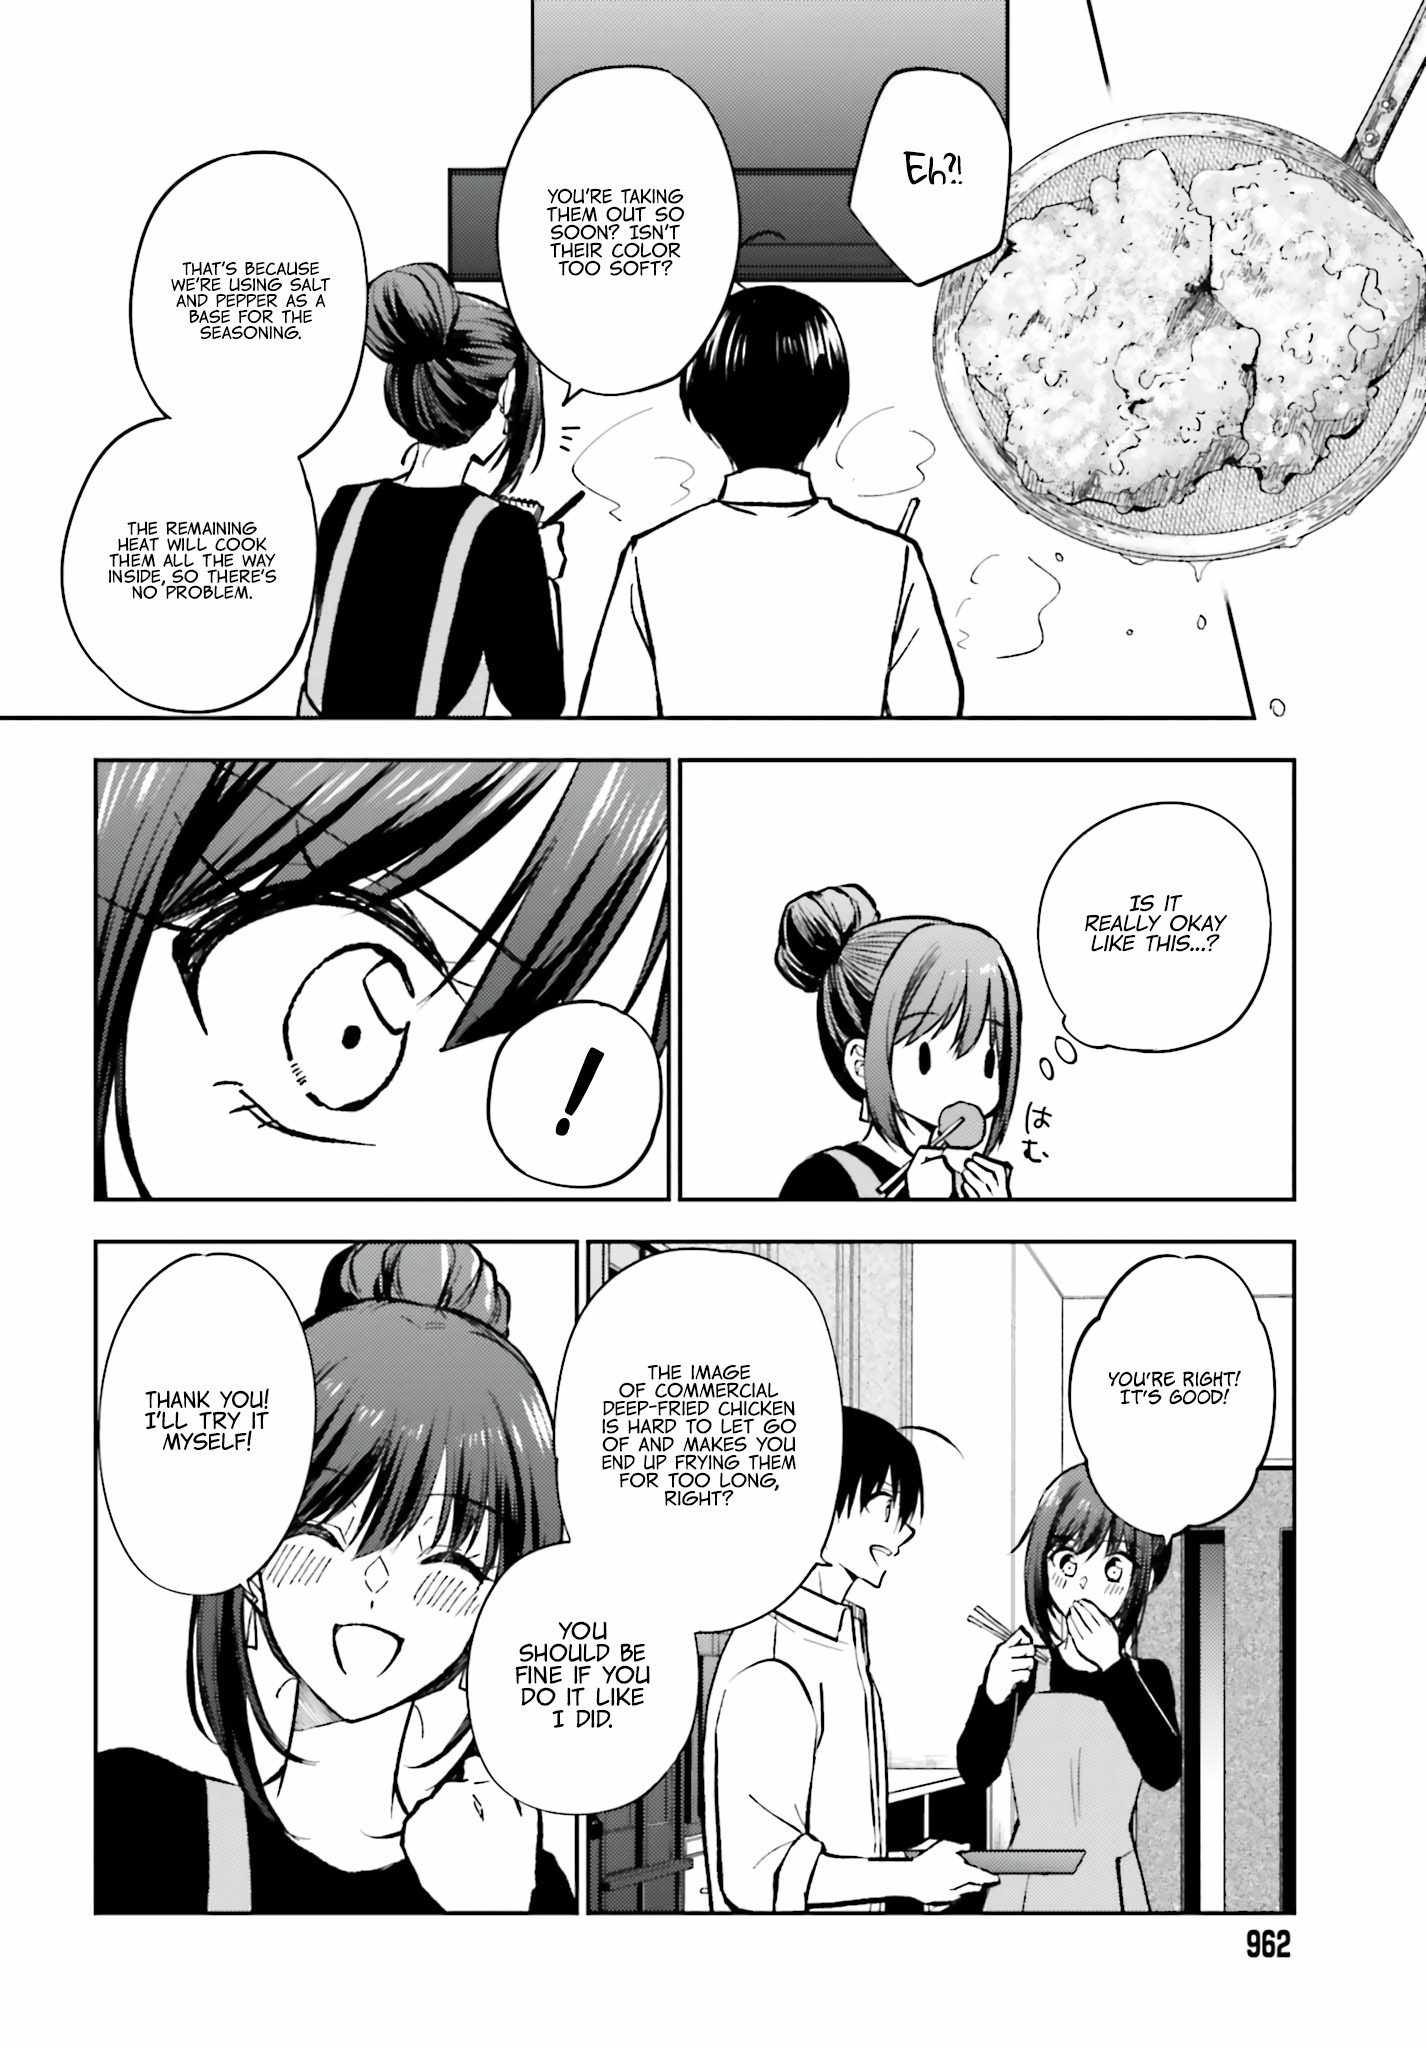 My Girlfriend Cheated on Me With a Senior, so I’m Cheating on Her With His Girlfriend Chapter 13-eng-li - Page 14